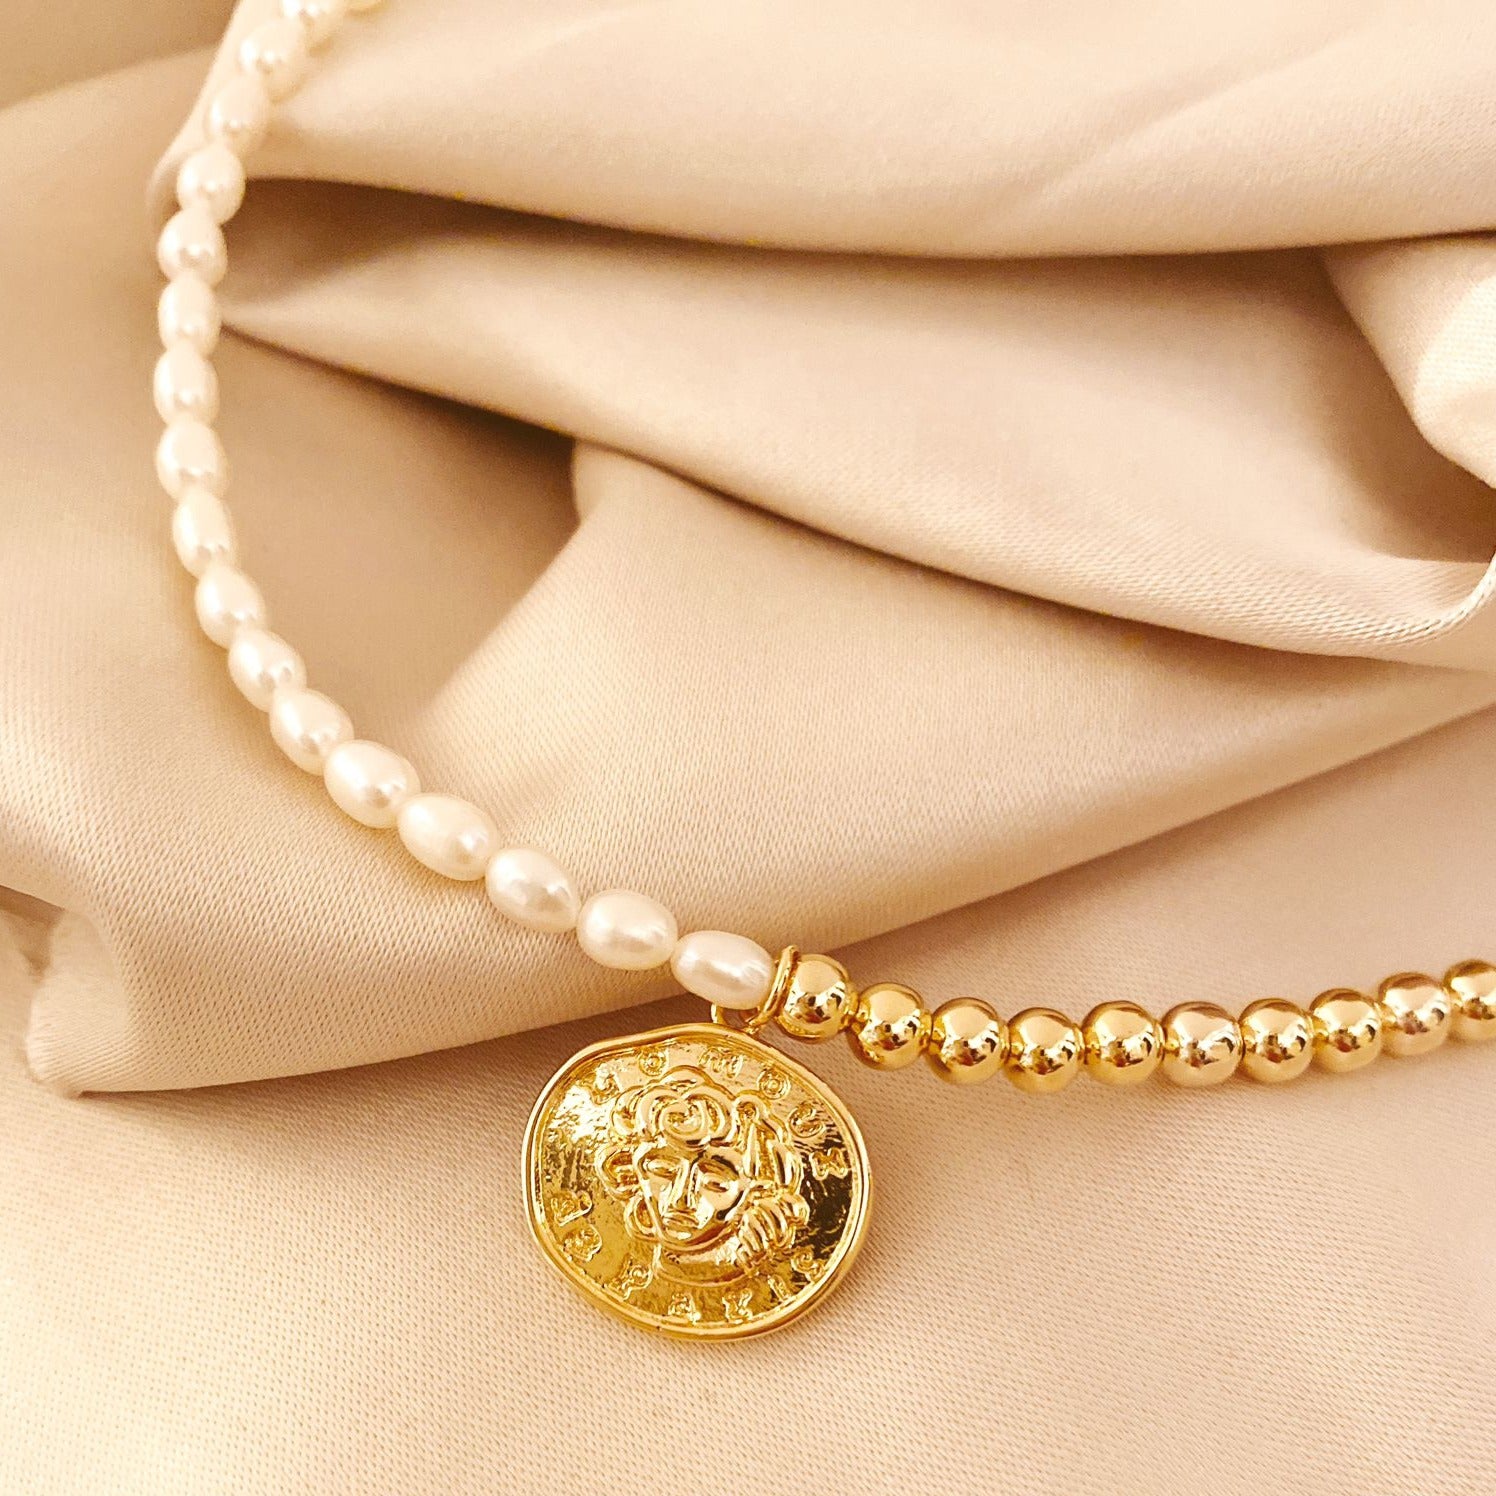 Pearl Necklace with Antique Medallion